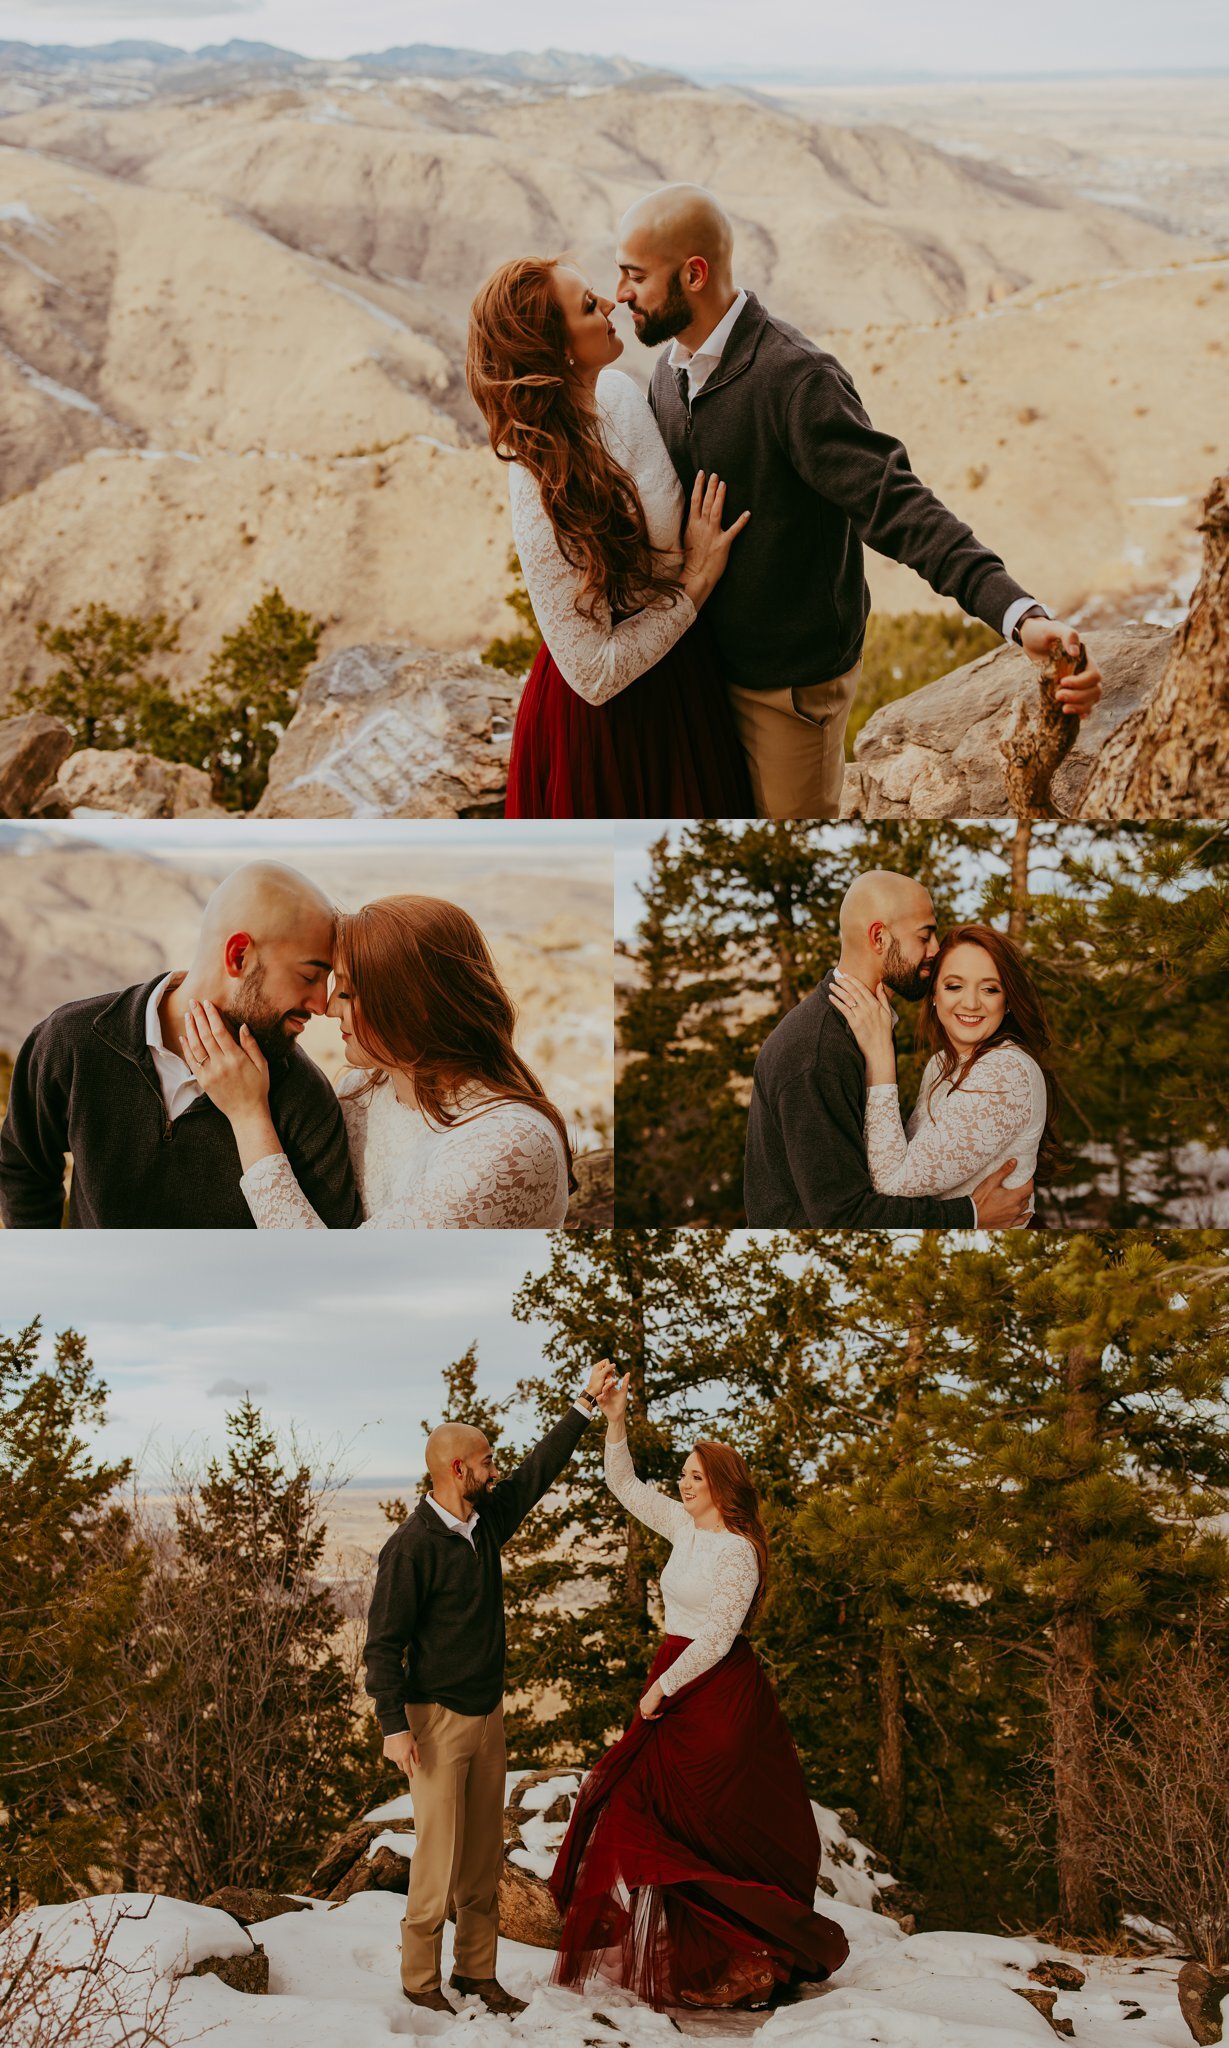 Winter Engagement Photos // Lookout Mountain in Golden, ColoradoWinter Engagement Photos // Lookout Mountain in Golden, Colorado